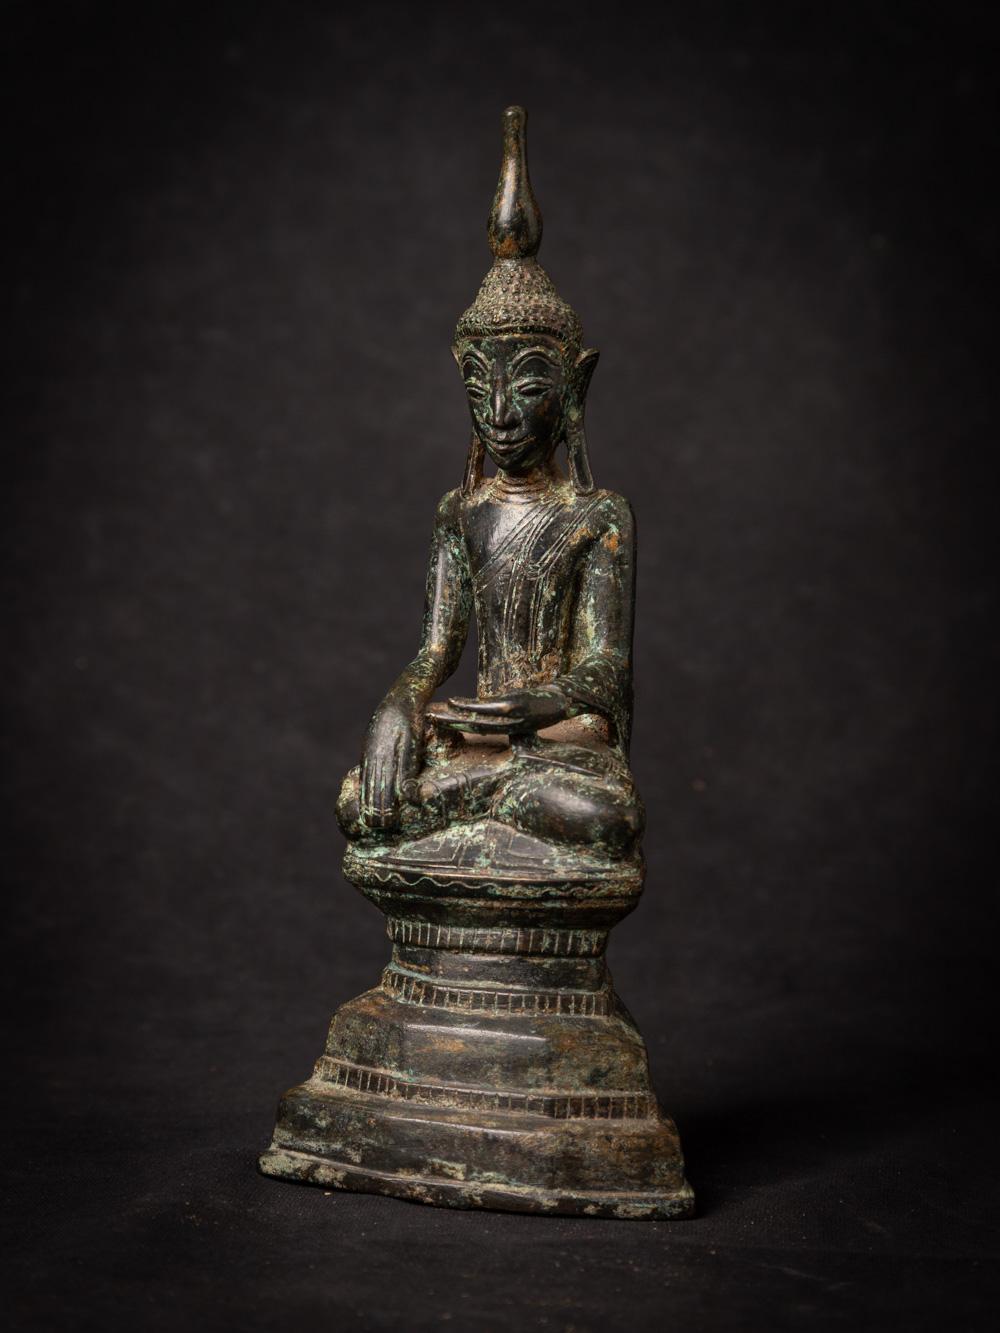 This antique bronze Burmese Buddha statue is a remarkable piece of artistry and spirituality. Crafted from bronze in the Shan (Tai Yai) style, it stands at a height of 22.8 cm, with dimensions of 9.6 cm in width and 7 cm in depth. The Bhumisparsha